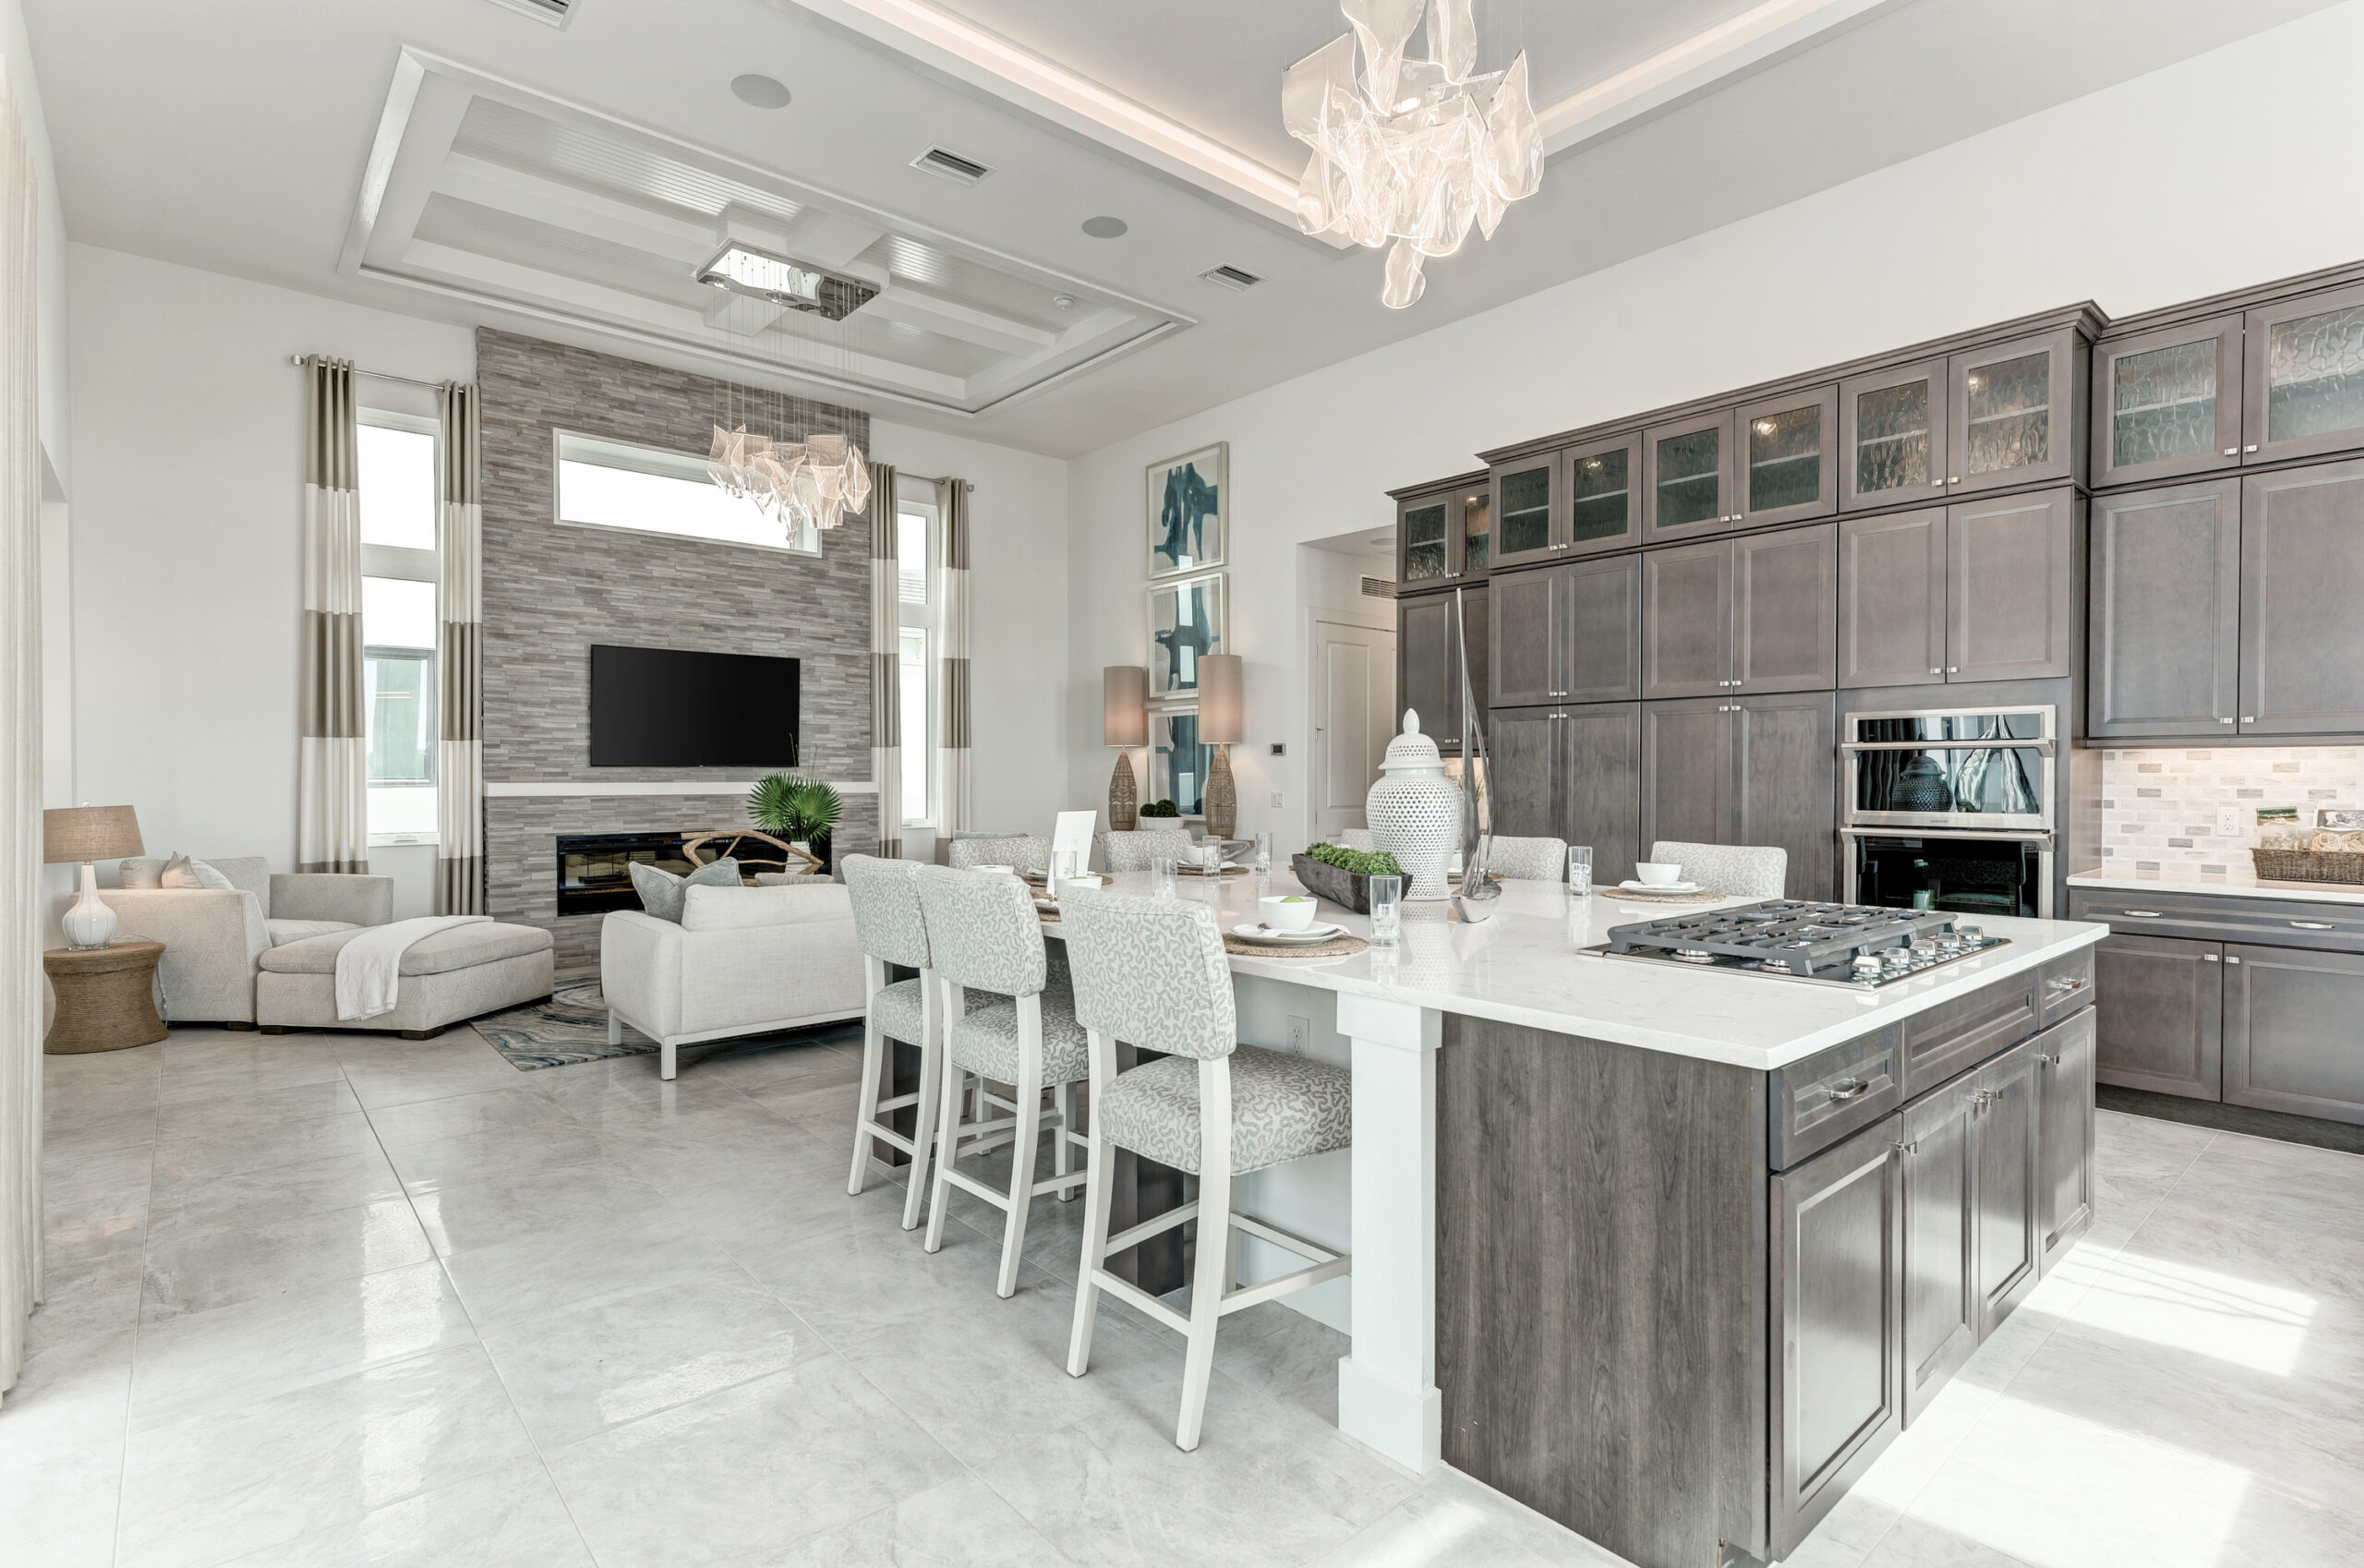 Sea Grape Family room and large modern kitchen